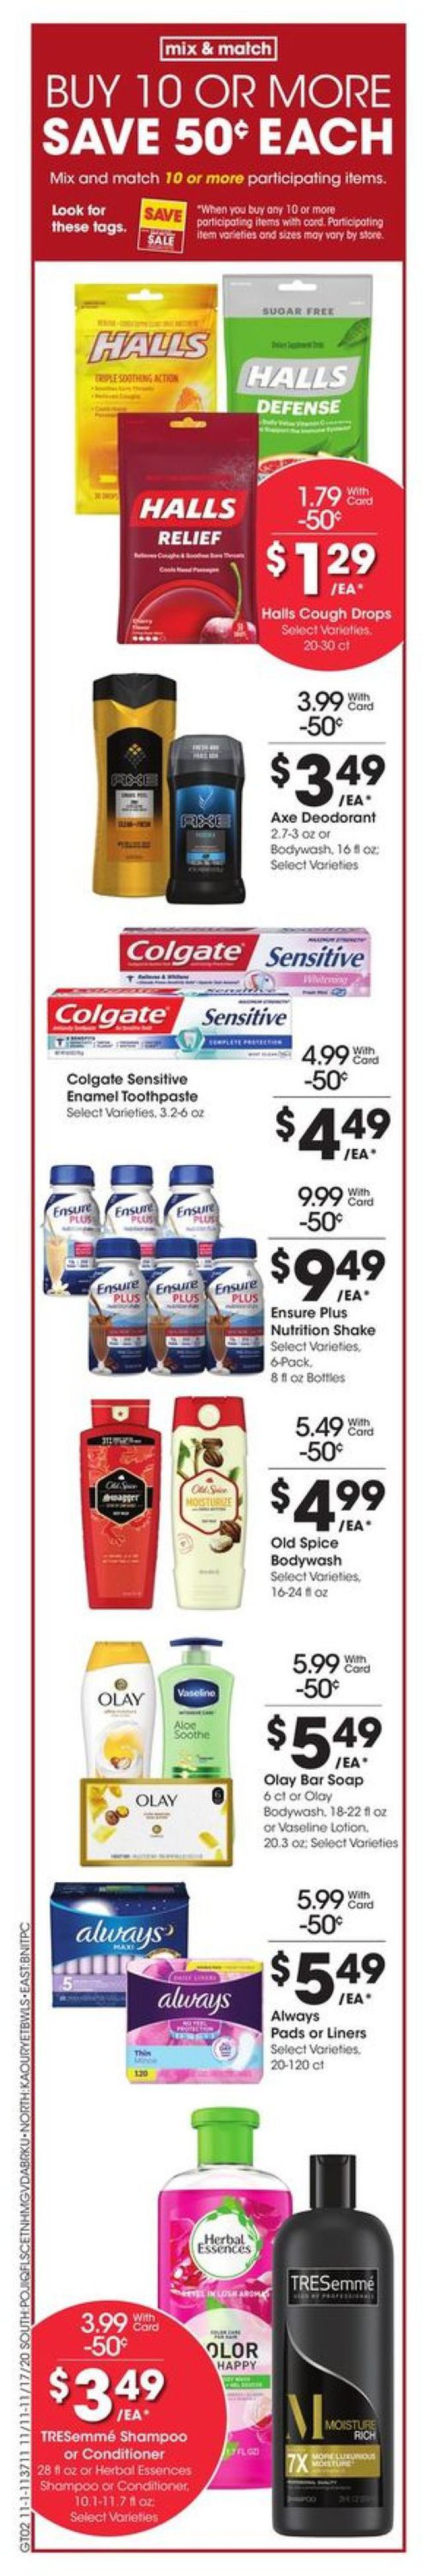 Fred Meyer Ad from 11/11/2020